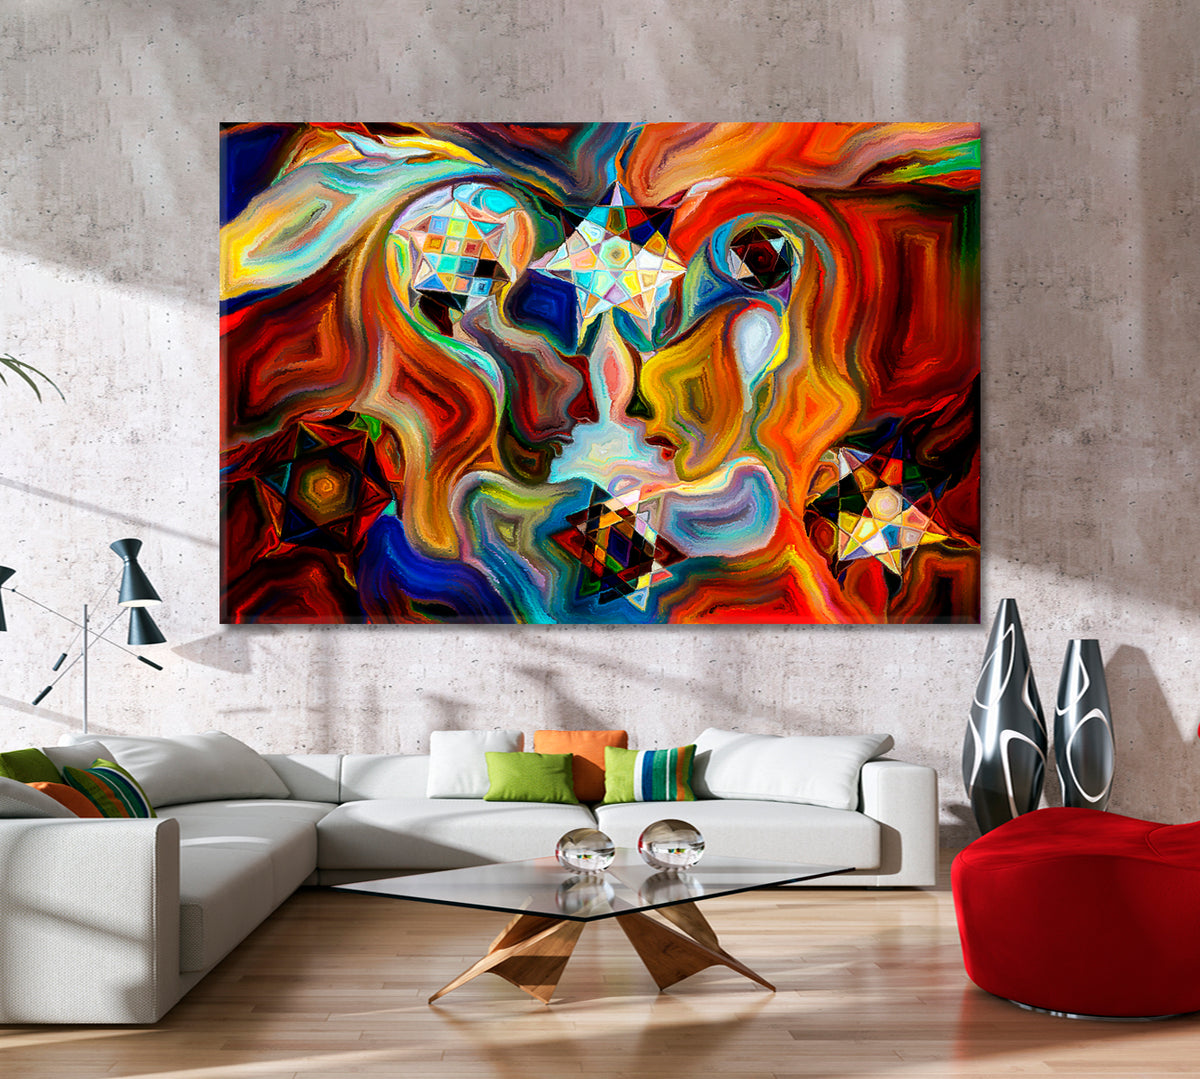 ABSTRACT INTERPLAY Mystic Profiles Colorful Patterns Symbols Vivid Shapes Abstract Art Print Artesty 1 panel 24" x 16" 